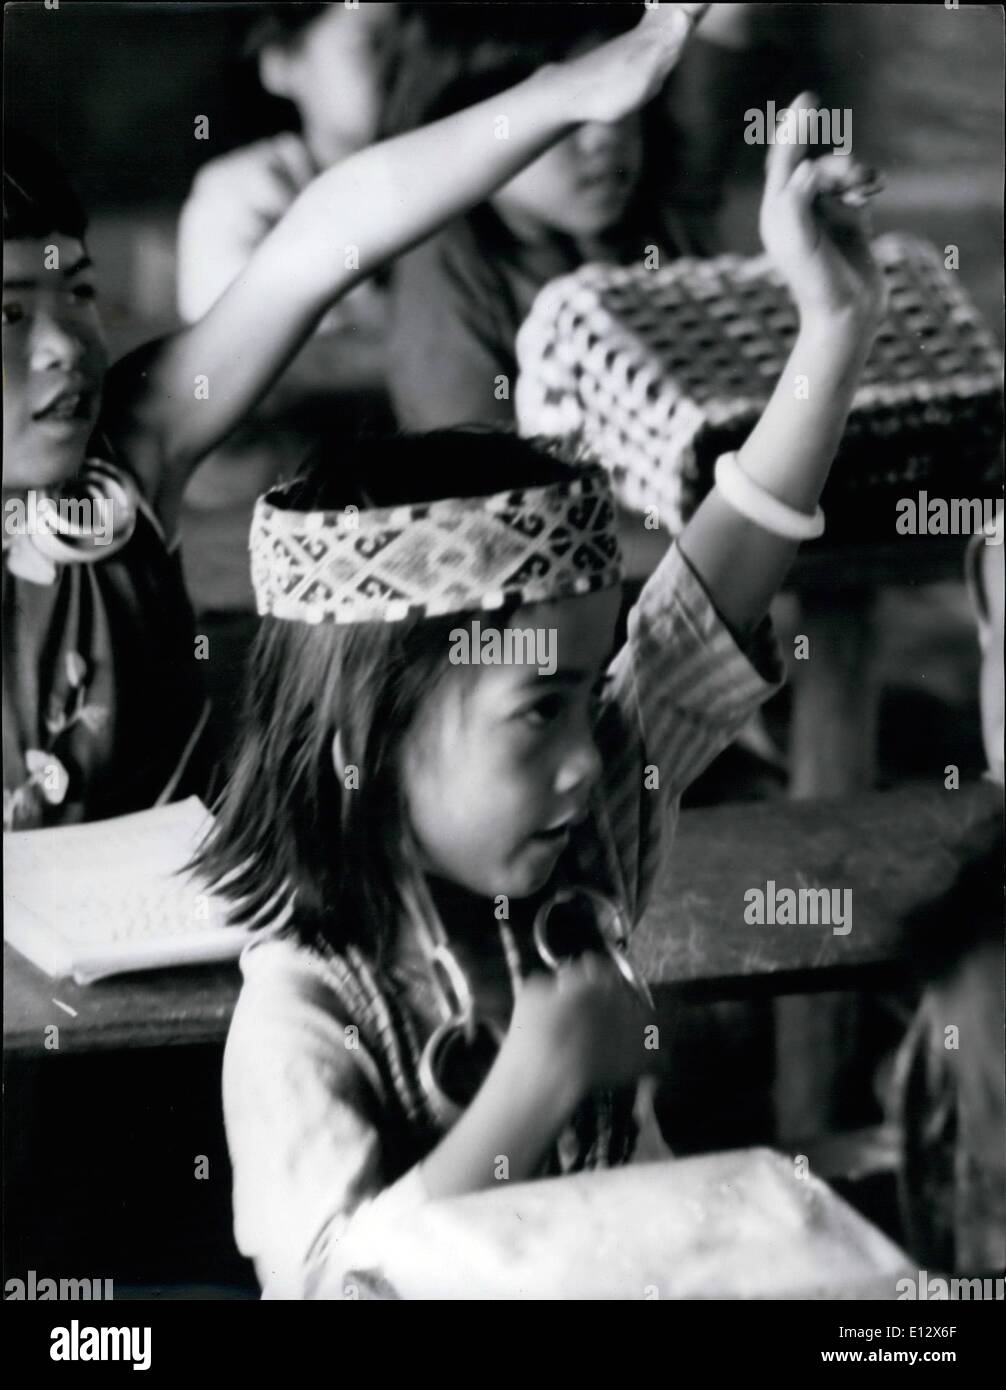 Feb. 25, 2012 - Drooping; Bejewelled Earlobes-And An Ex-Pupil At Ohio State Univ.: That's Sarawak's Jungle School A small girl sits demurely at her desk, her exercise book before her, hands in her lap, eyes fixed on her teacher-just like any other good pupil. but she has a beaded crown on her head, and her little ears are weighed down, drooping , decorated by a cluster of glittering heavy rings. And the classroom walls are bamboo, the windows air Stock Photo